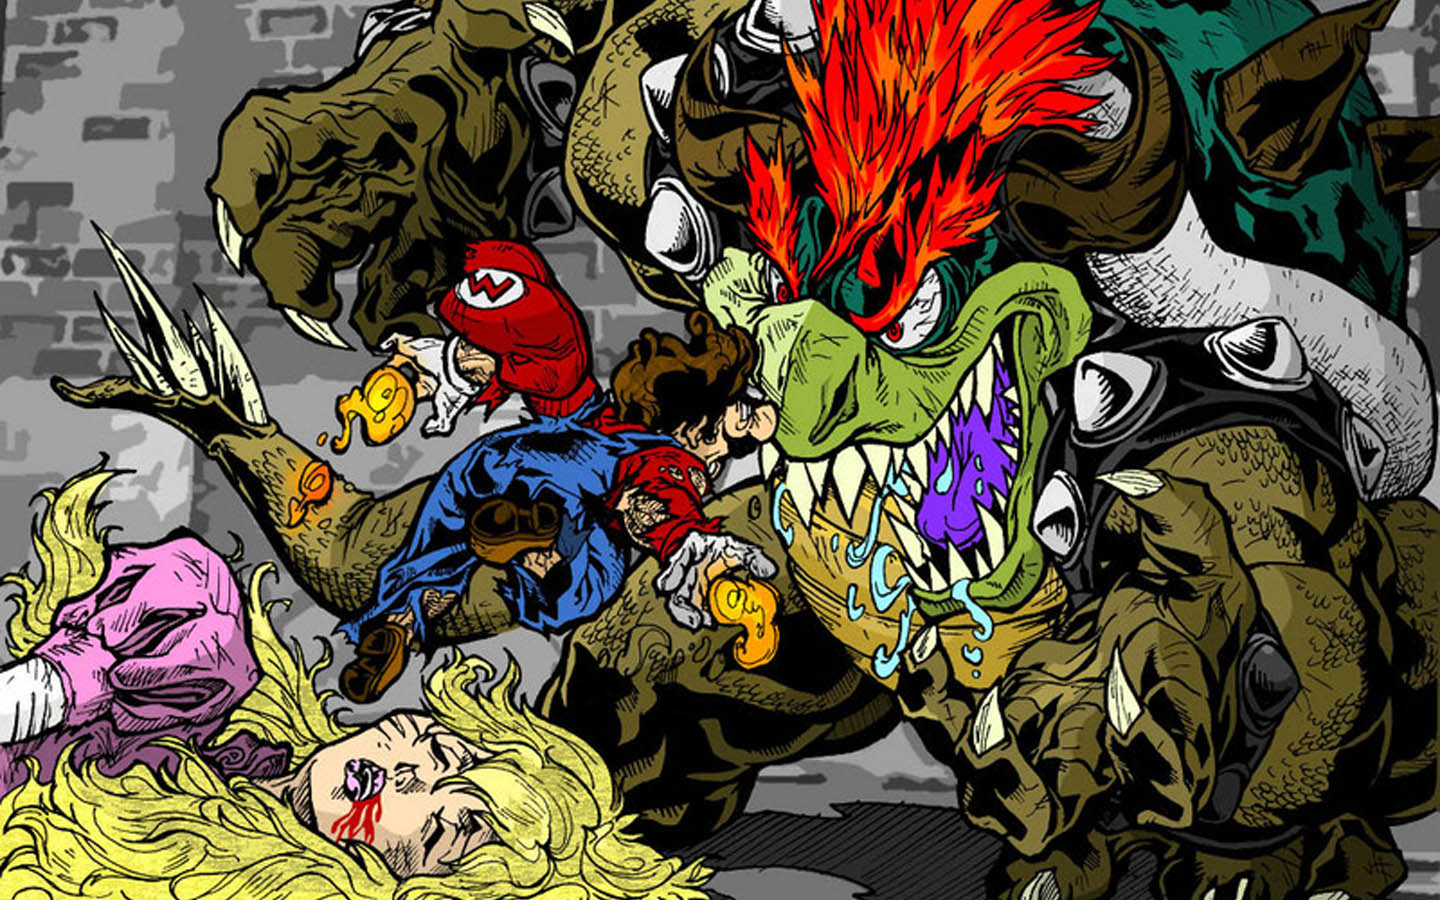   epic mario vs bowser   Cool Backgrounds and Wallpapers 1440x900